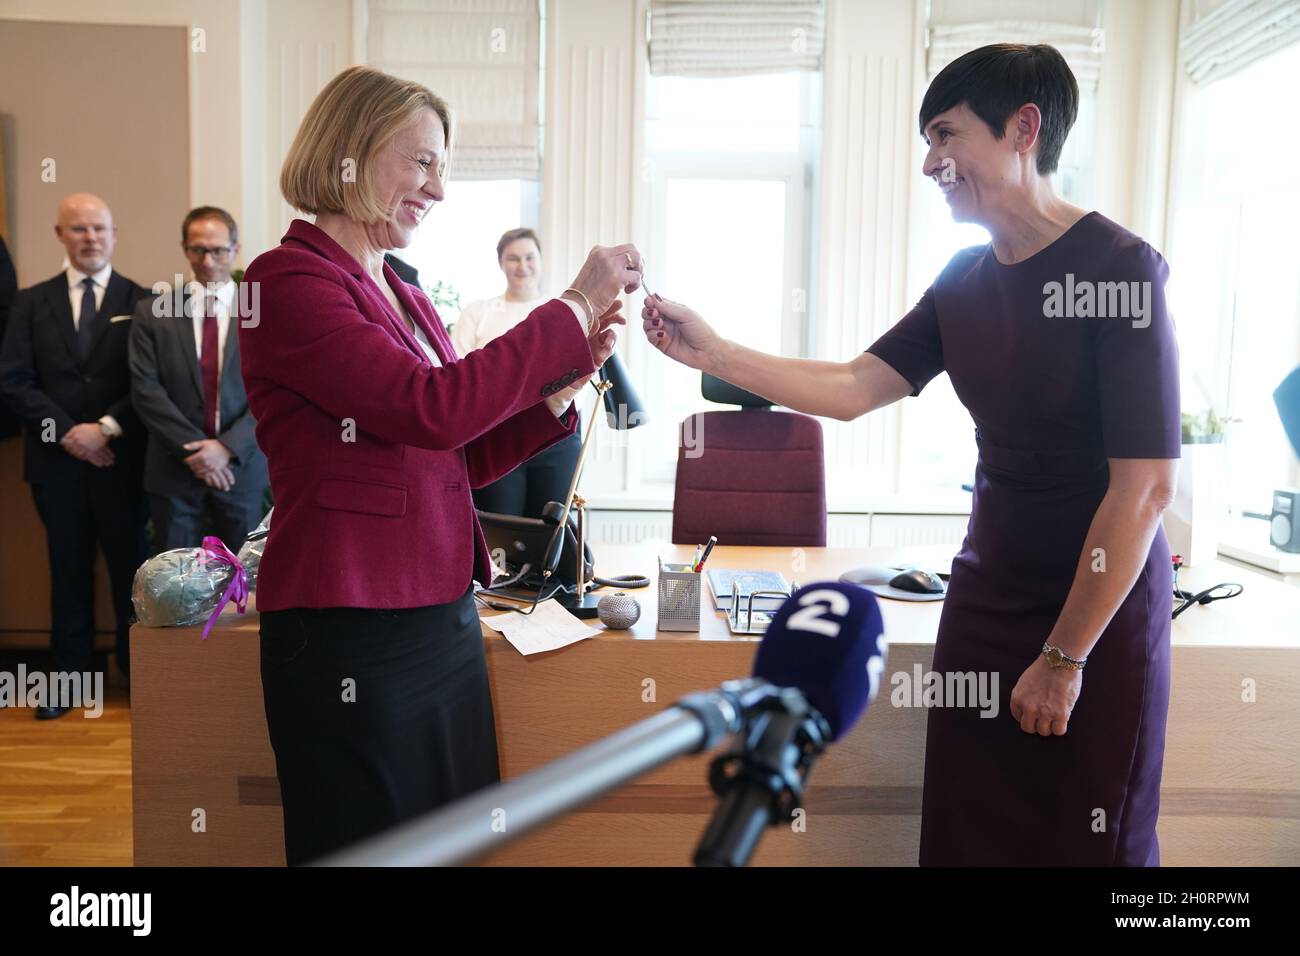 Oslo, Norway, 14/10/2021, Oslo 20211014.Upcoming Foreign Minister Anniken Huitfeldt (Labor Party) and outgoing Foreign Minister Ine Marie Eriksen Soreide (H) during the key handover at the Ministry of Foreign Affairs in Oslo on Thursday. Photo: Haakon Mosvold Larsen / NTB Stock Photo